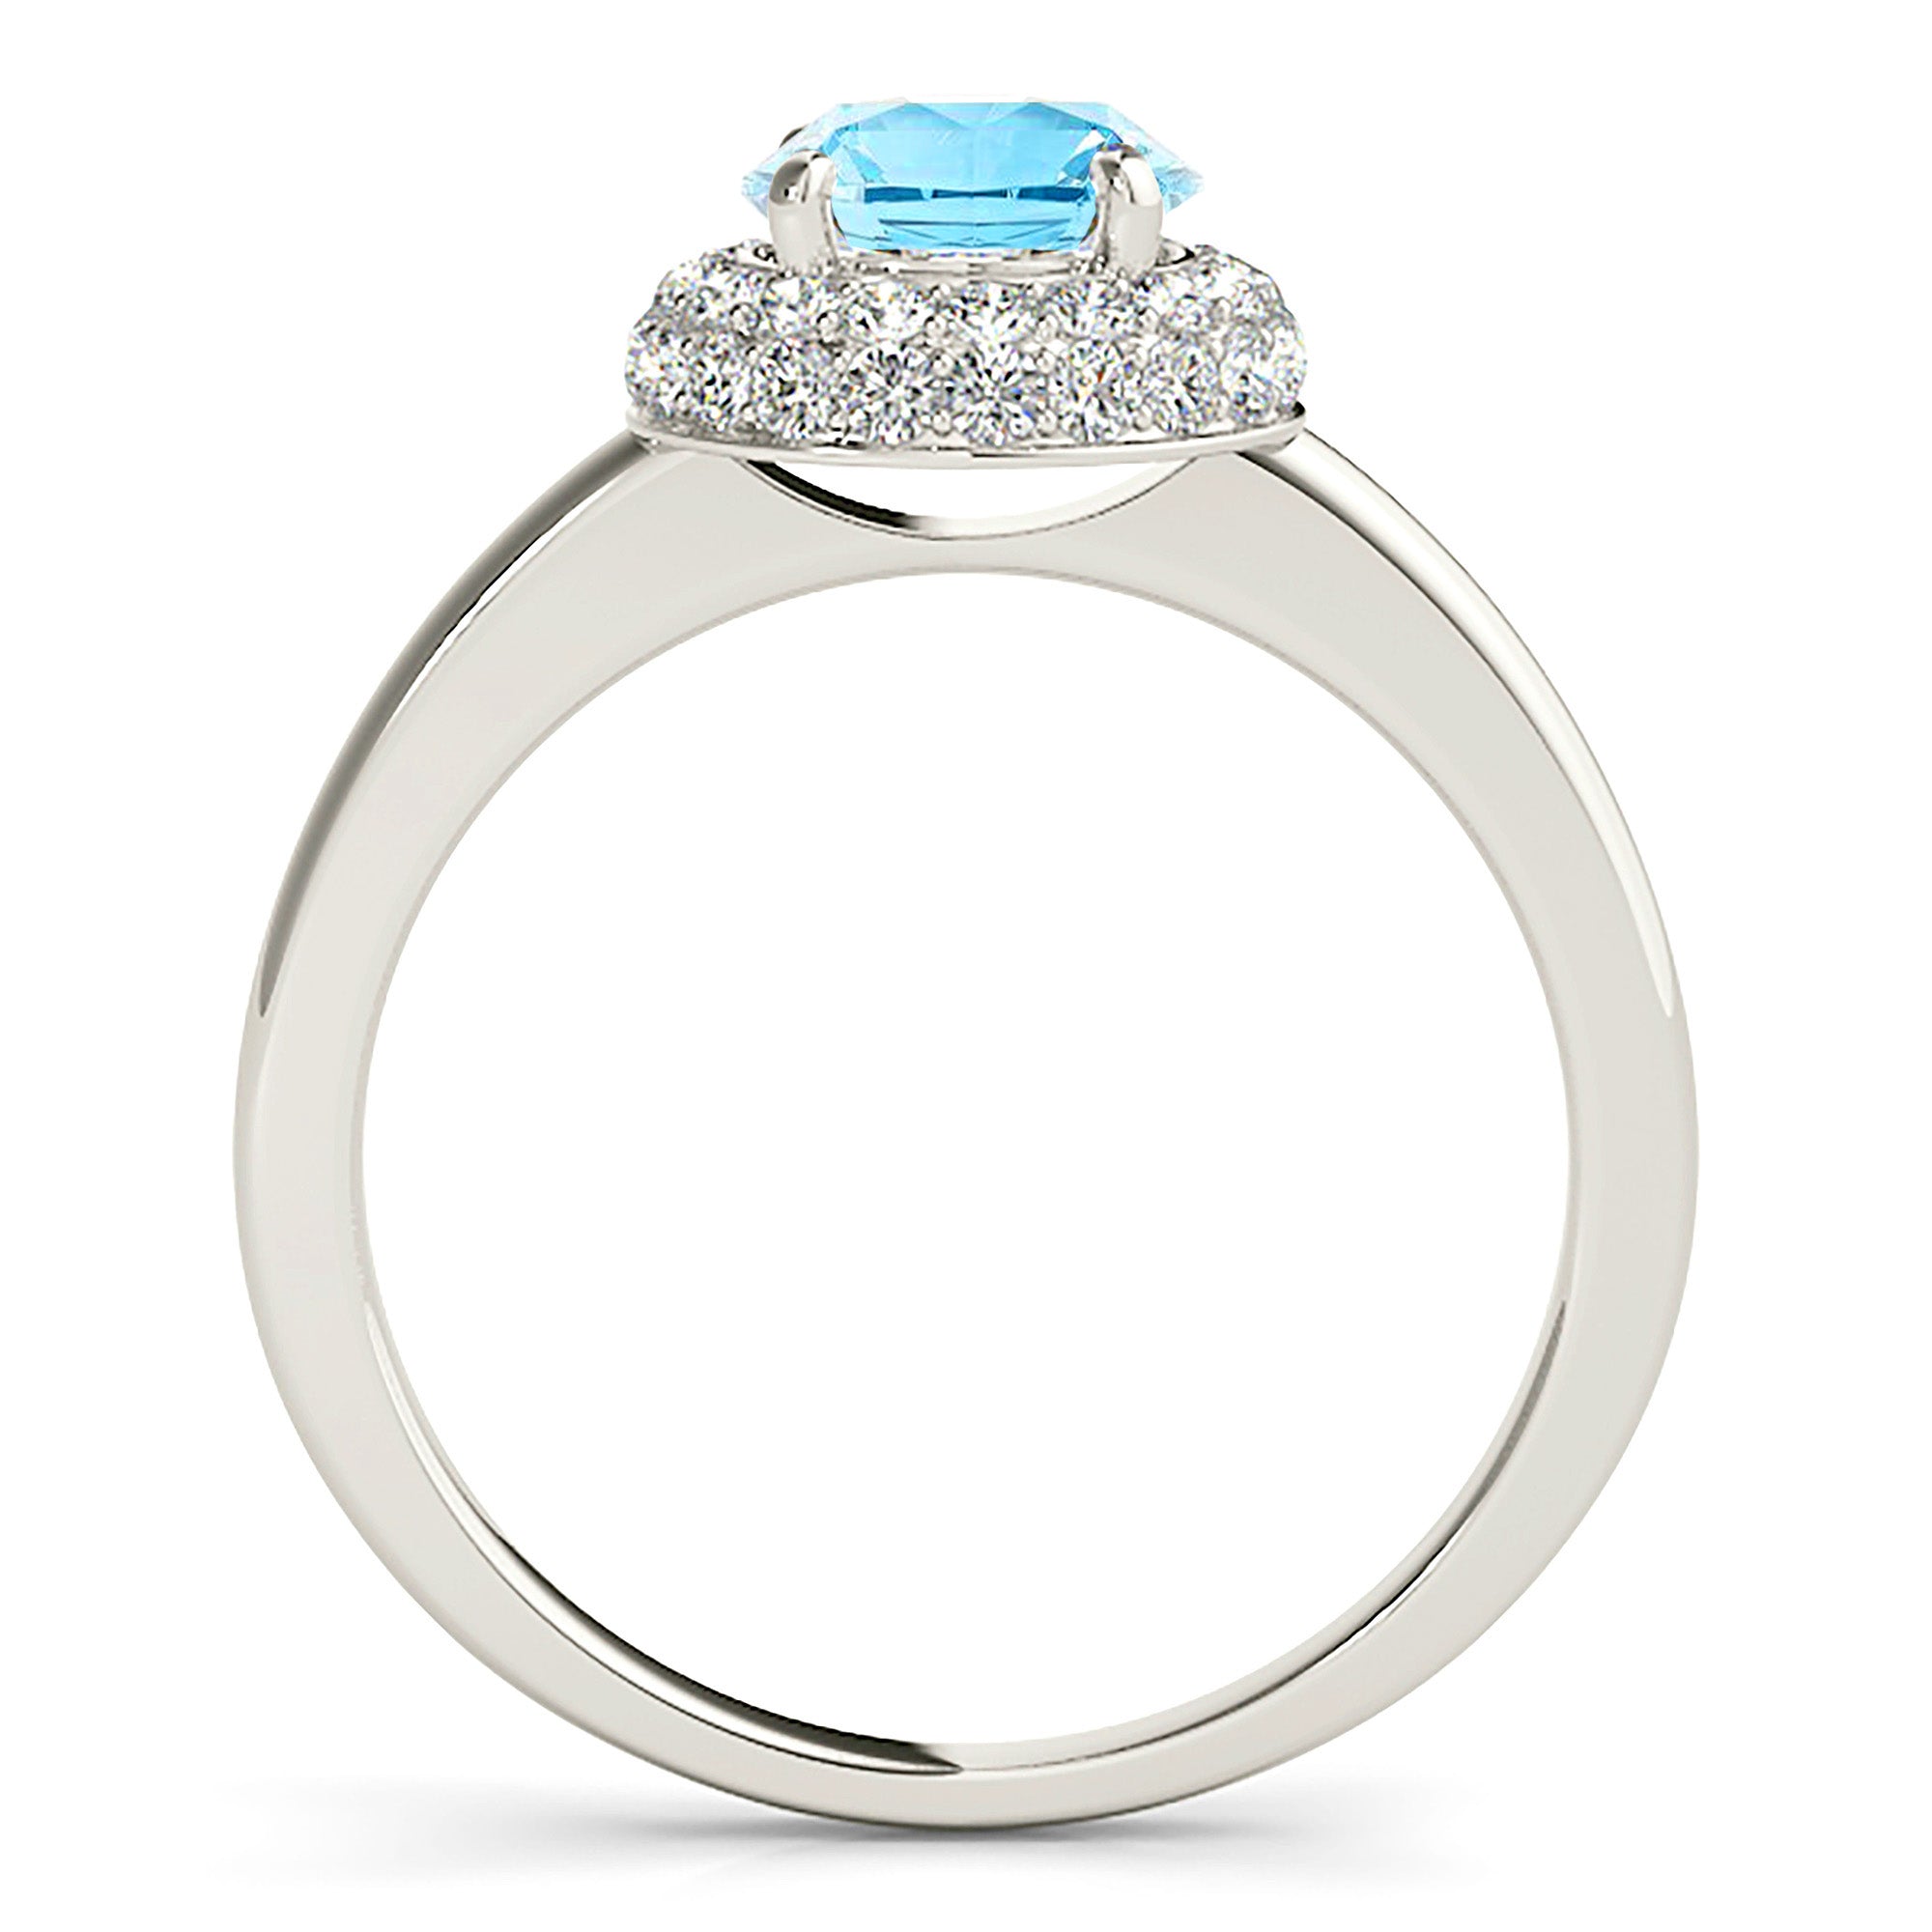 1.10 ct. Genuine Aquamarine Ring With 0.40 ctw. Diamond Double Edge Halo and Solid Gold Rounded Band | Round Blue Aquamarine Halo Ring-in 14K/18K White, Yellow, Rose Gold and Platinum - Christmas Jewelry Gift -VIRABYANI